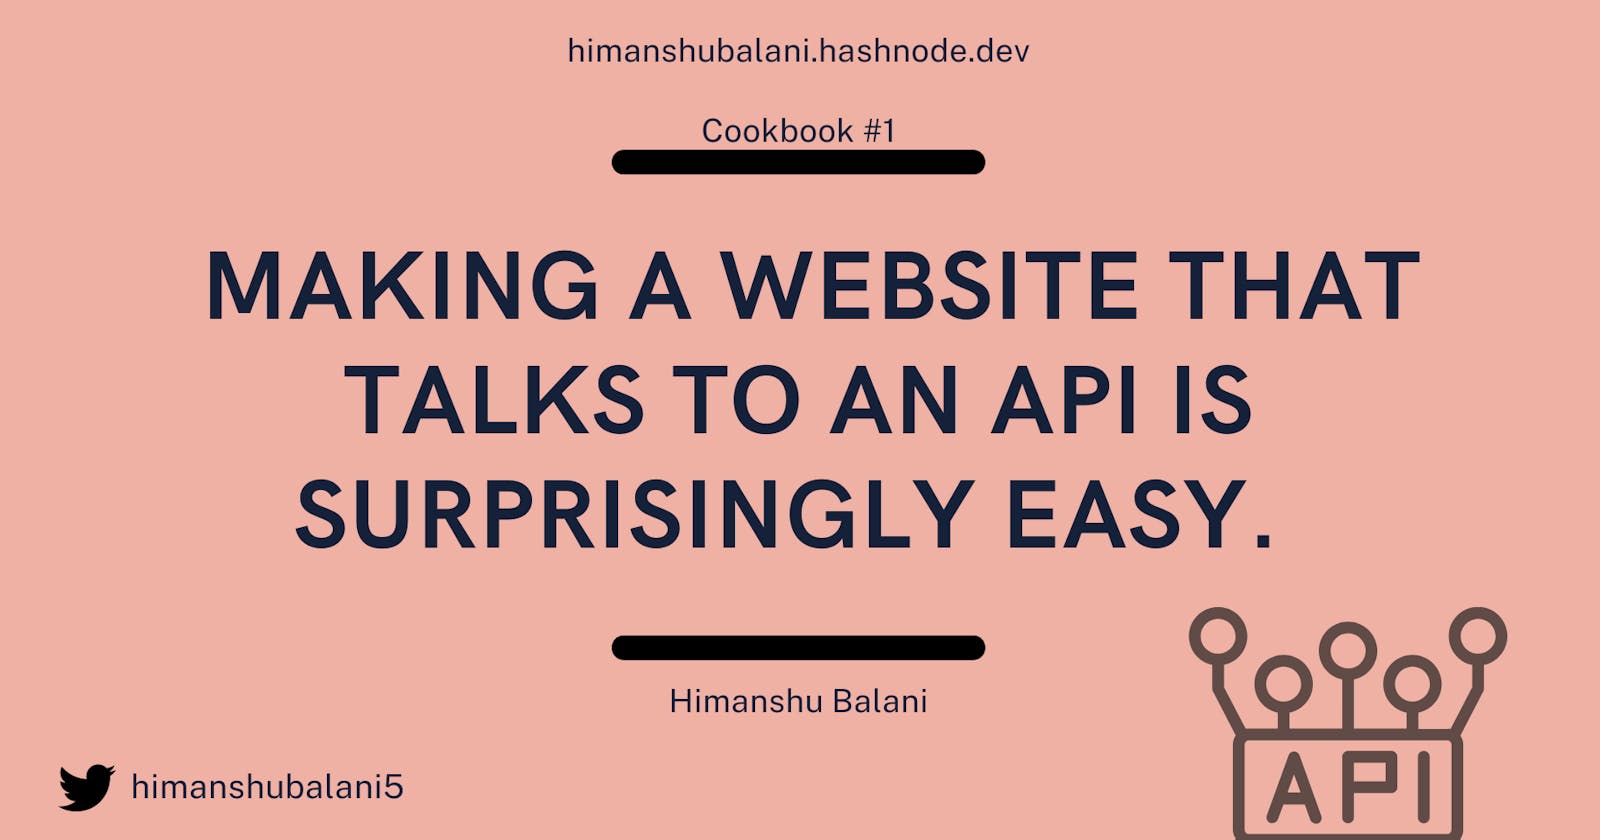 Cookbook #1: Making a website that talks to an API is surprisingly easy.